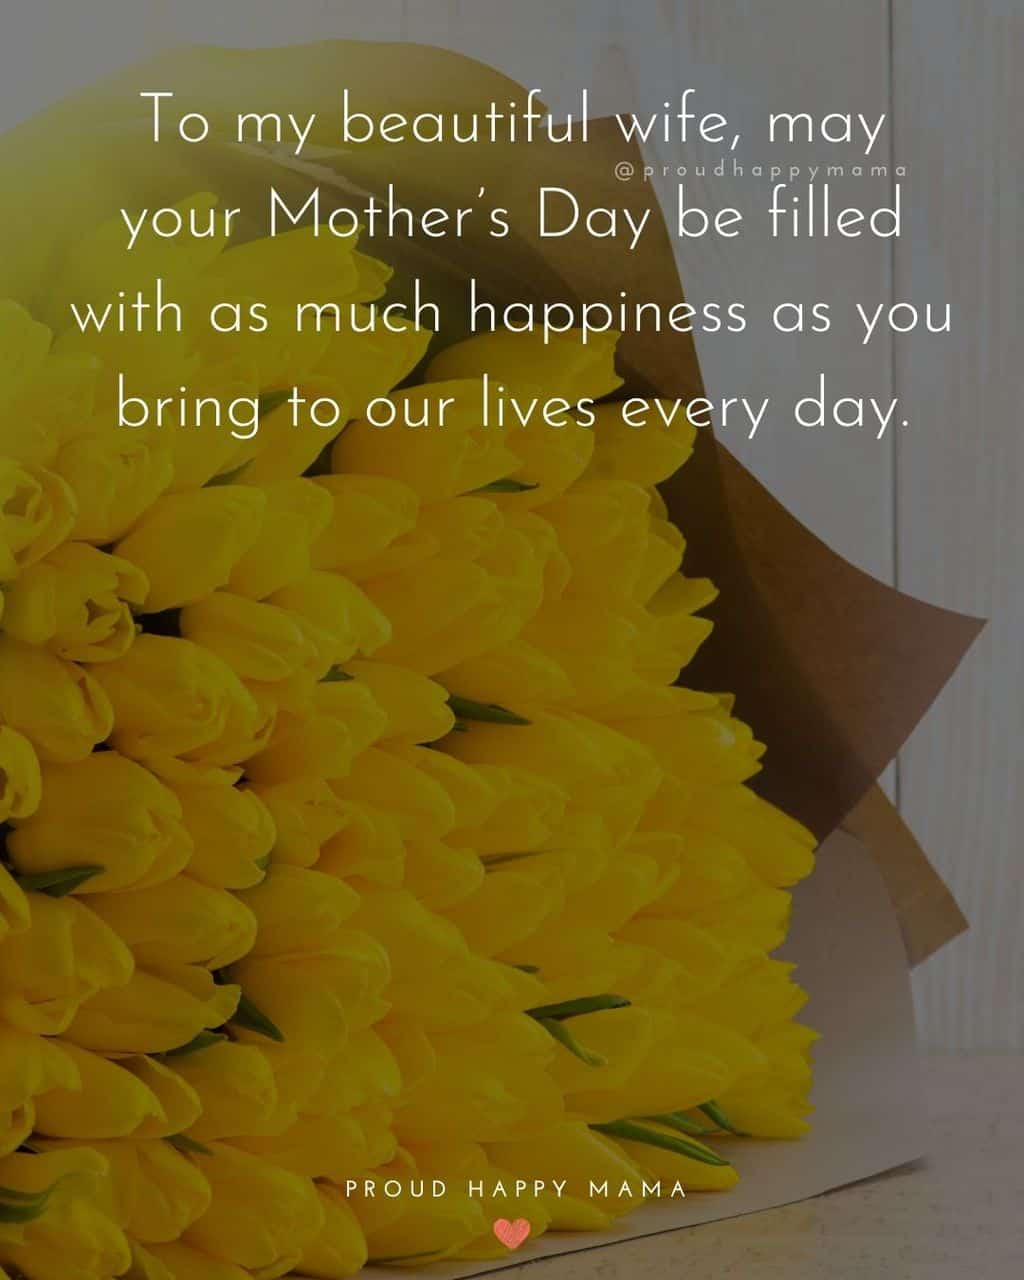 Happy Mothers Day Quotes For Wife - To my beautiful wife, may your Mother’s Day be filled with as much happiness as you bring